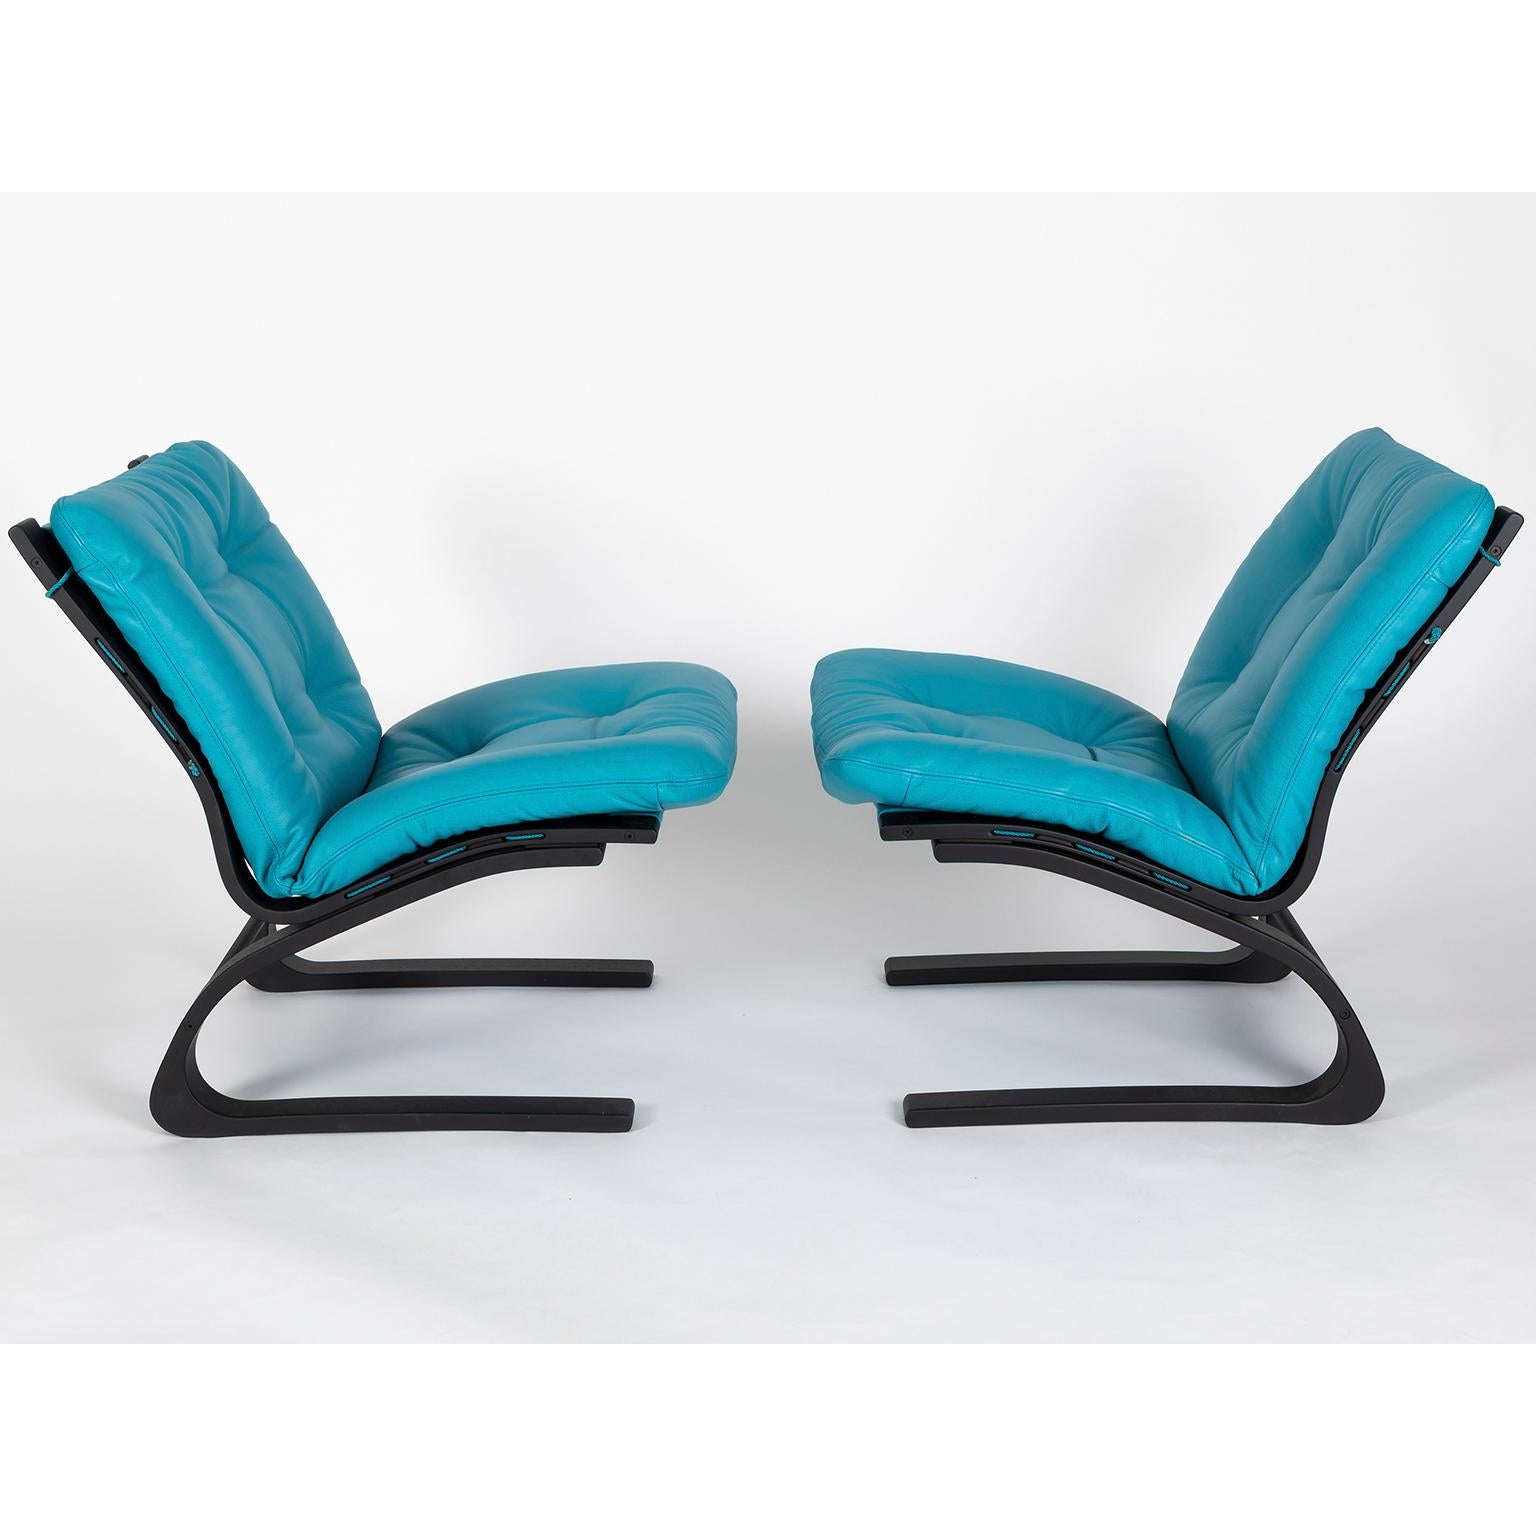 These amazingly confortable chairs were fully re-conditioned. The bent plywood legs have been darkned to a matte black finish and re-upholstered in mediteranean blue leather.

Dimensions:
Width 63 cm; depth 81 cm; total height 79 cm; seat height